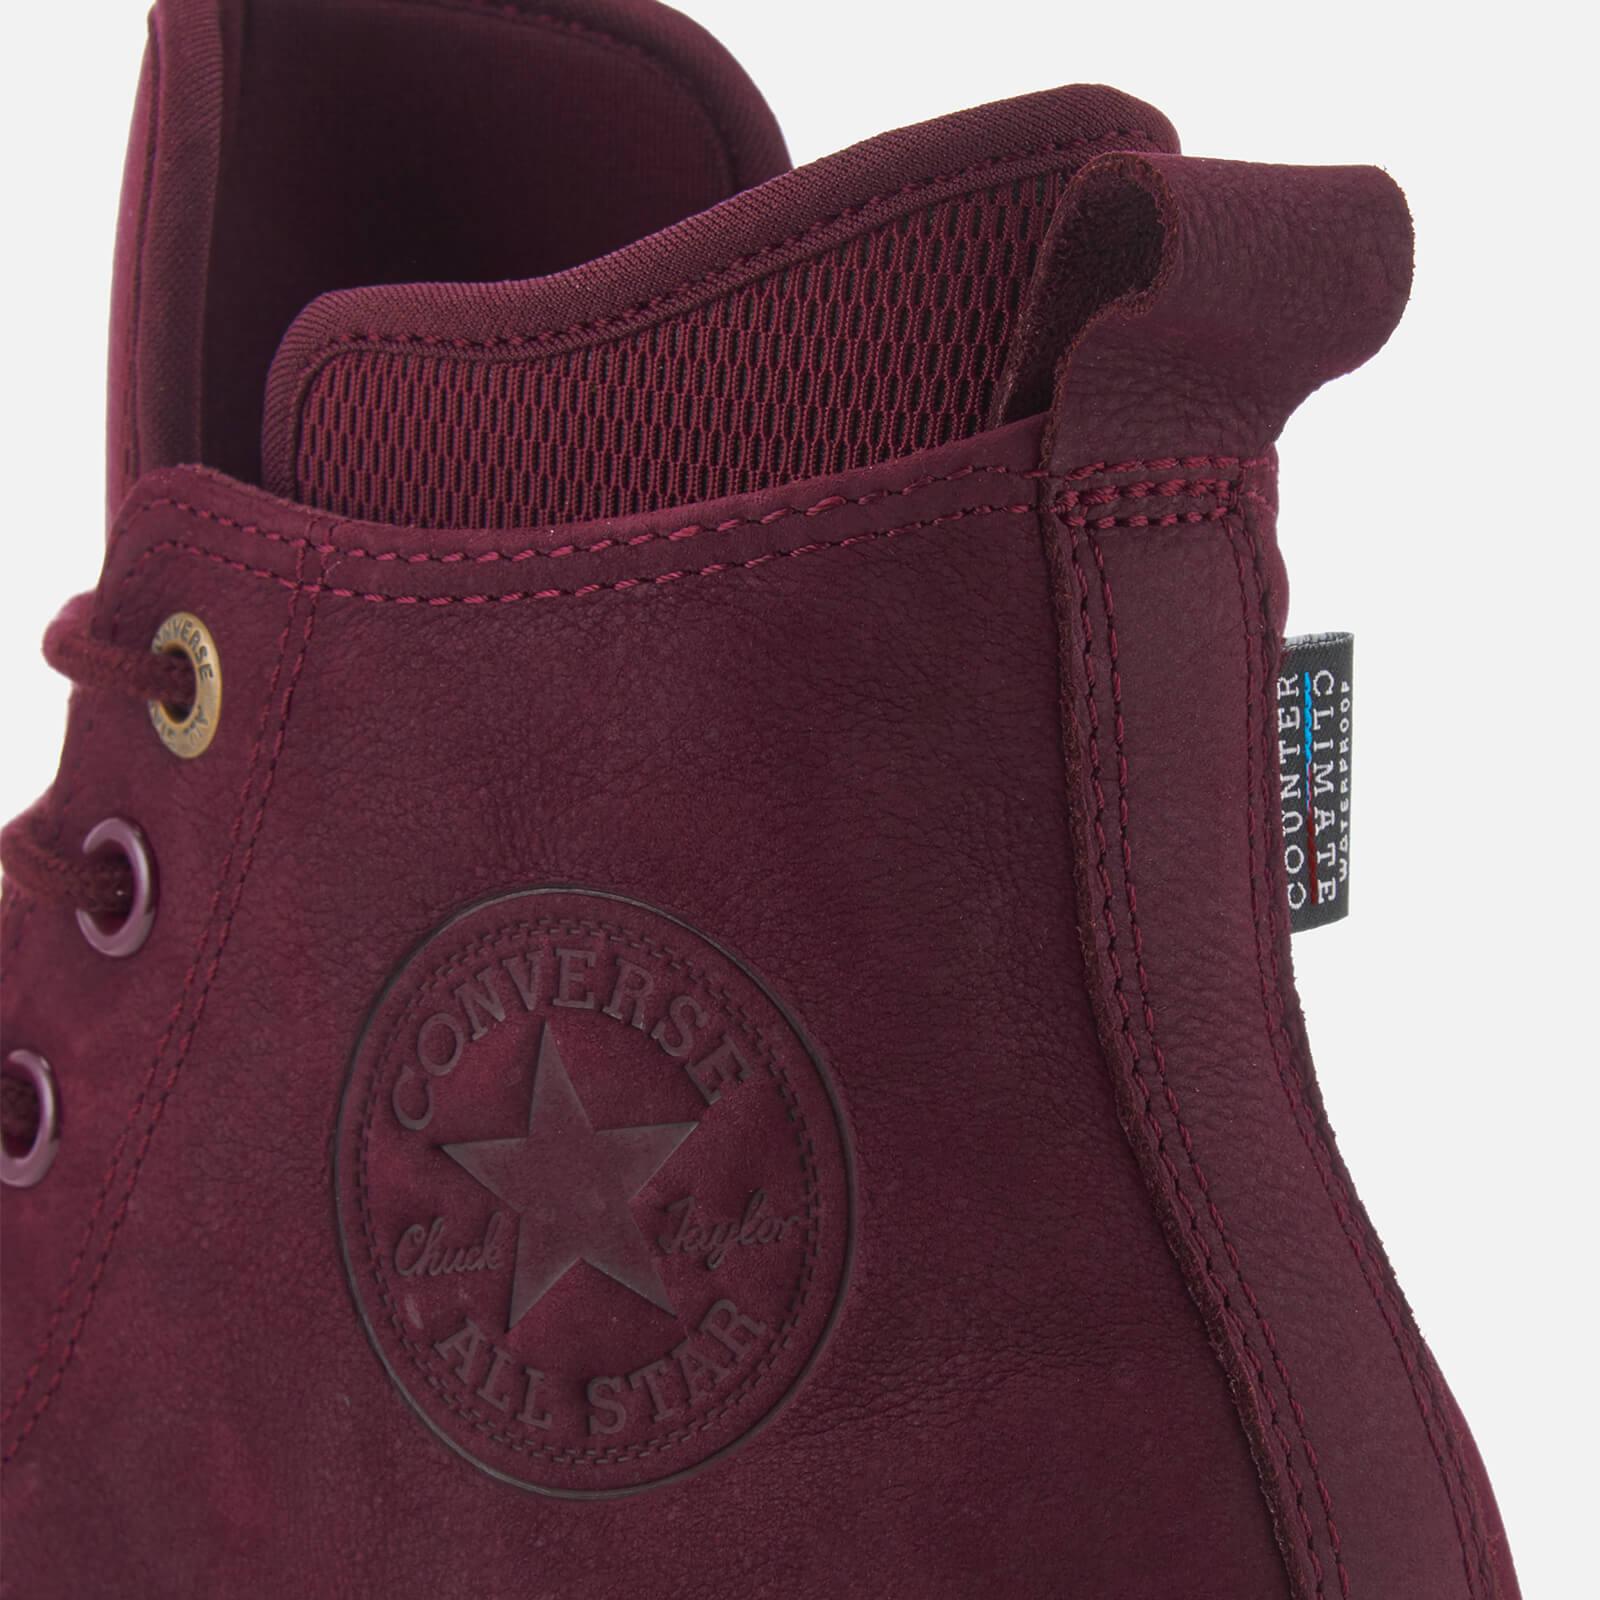 Leather Chuck Taylor All Star Waterproof Boots in (Purple) for - Lyst